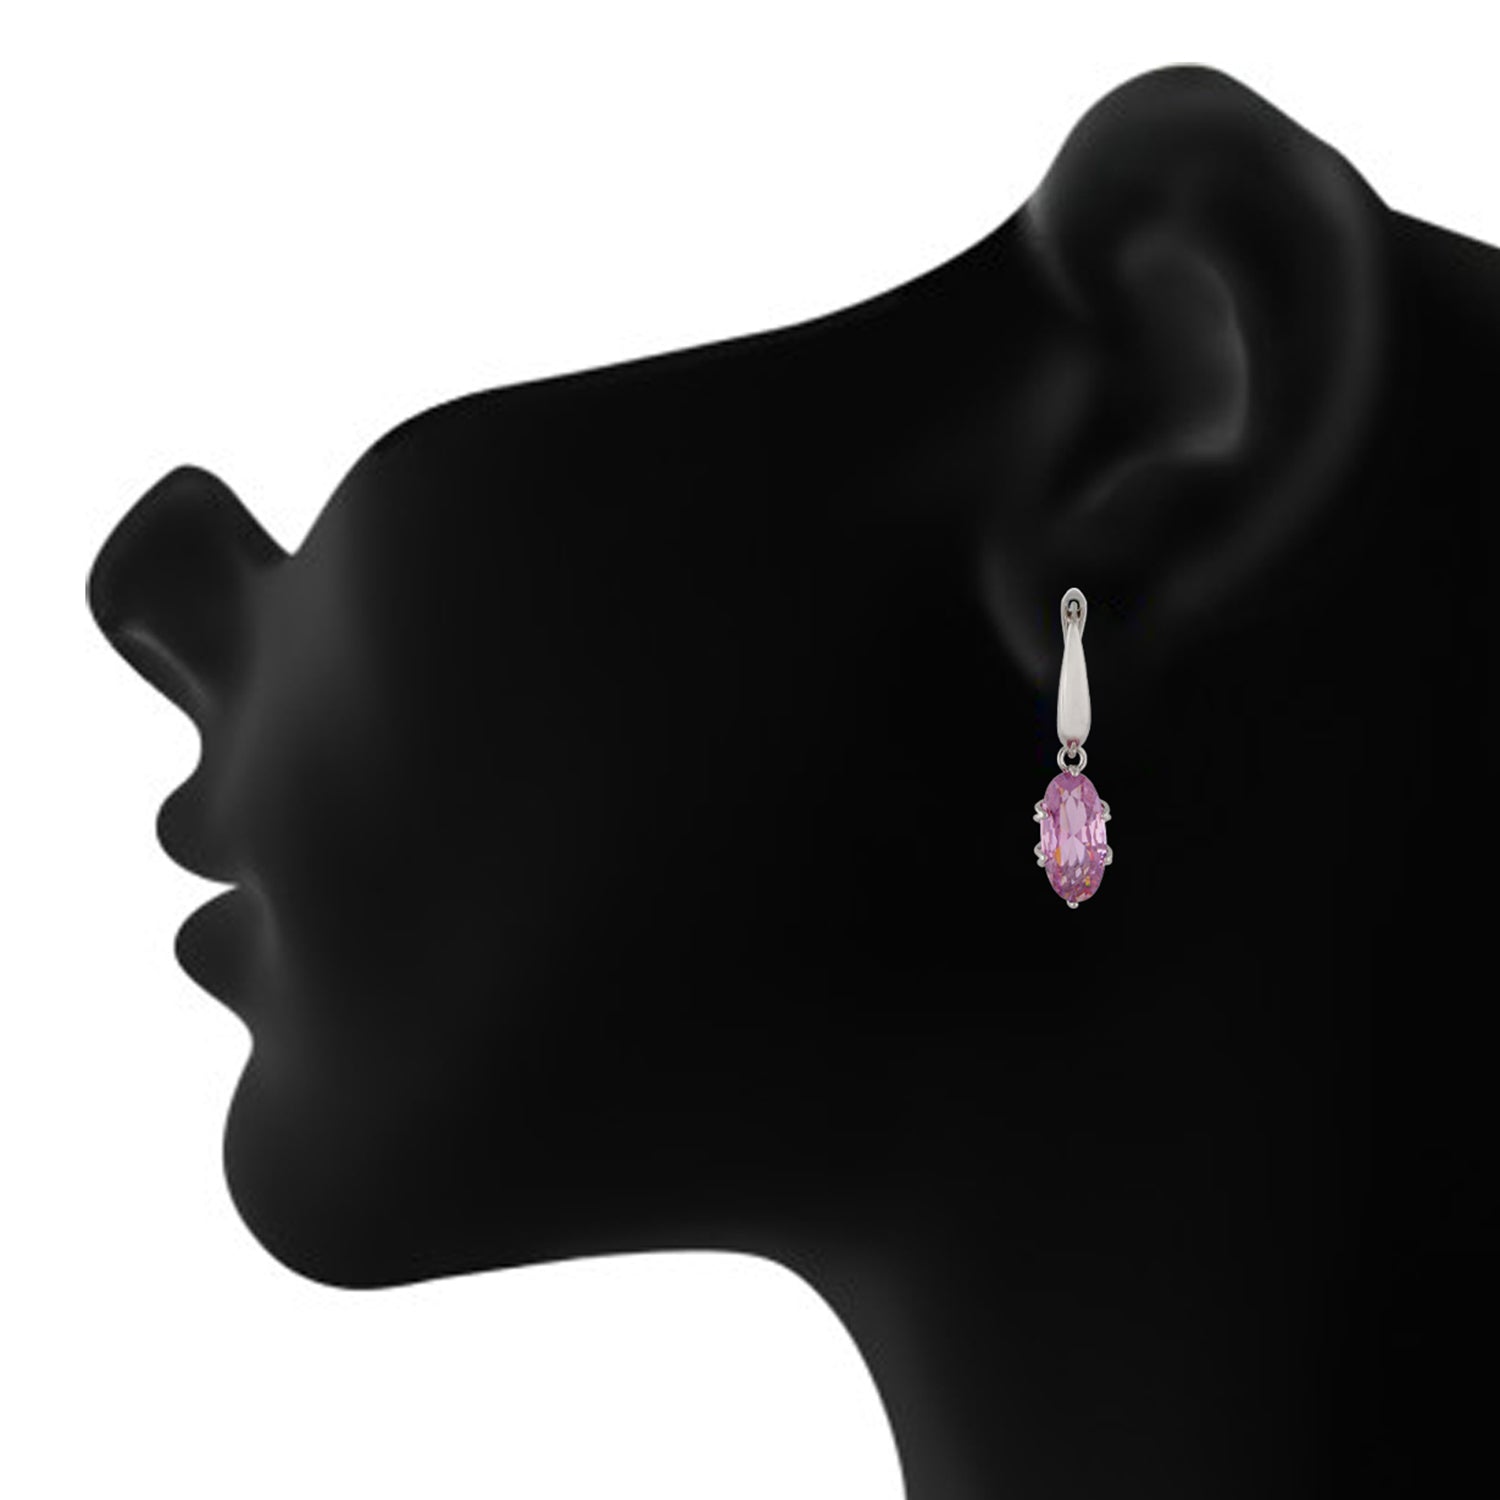 Impressive Pink and Silver Colour Oval Shape Earring for Girls and Women